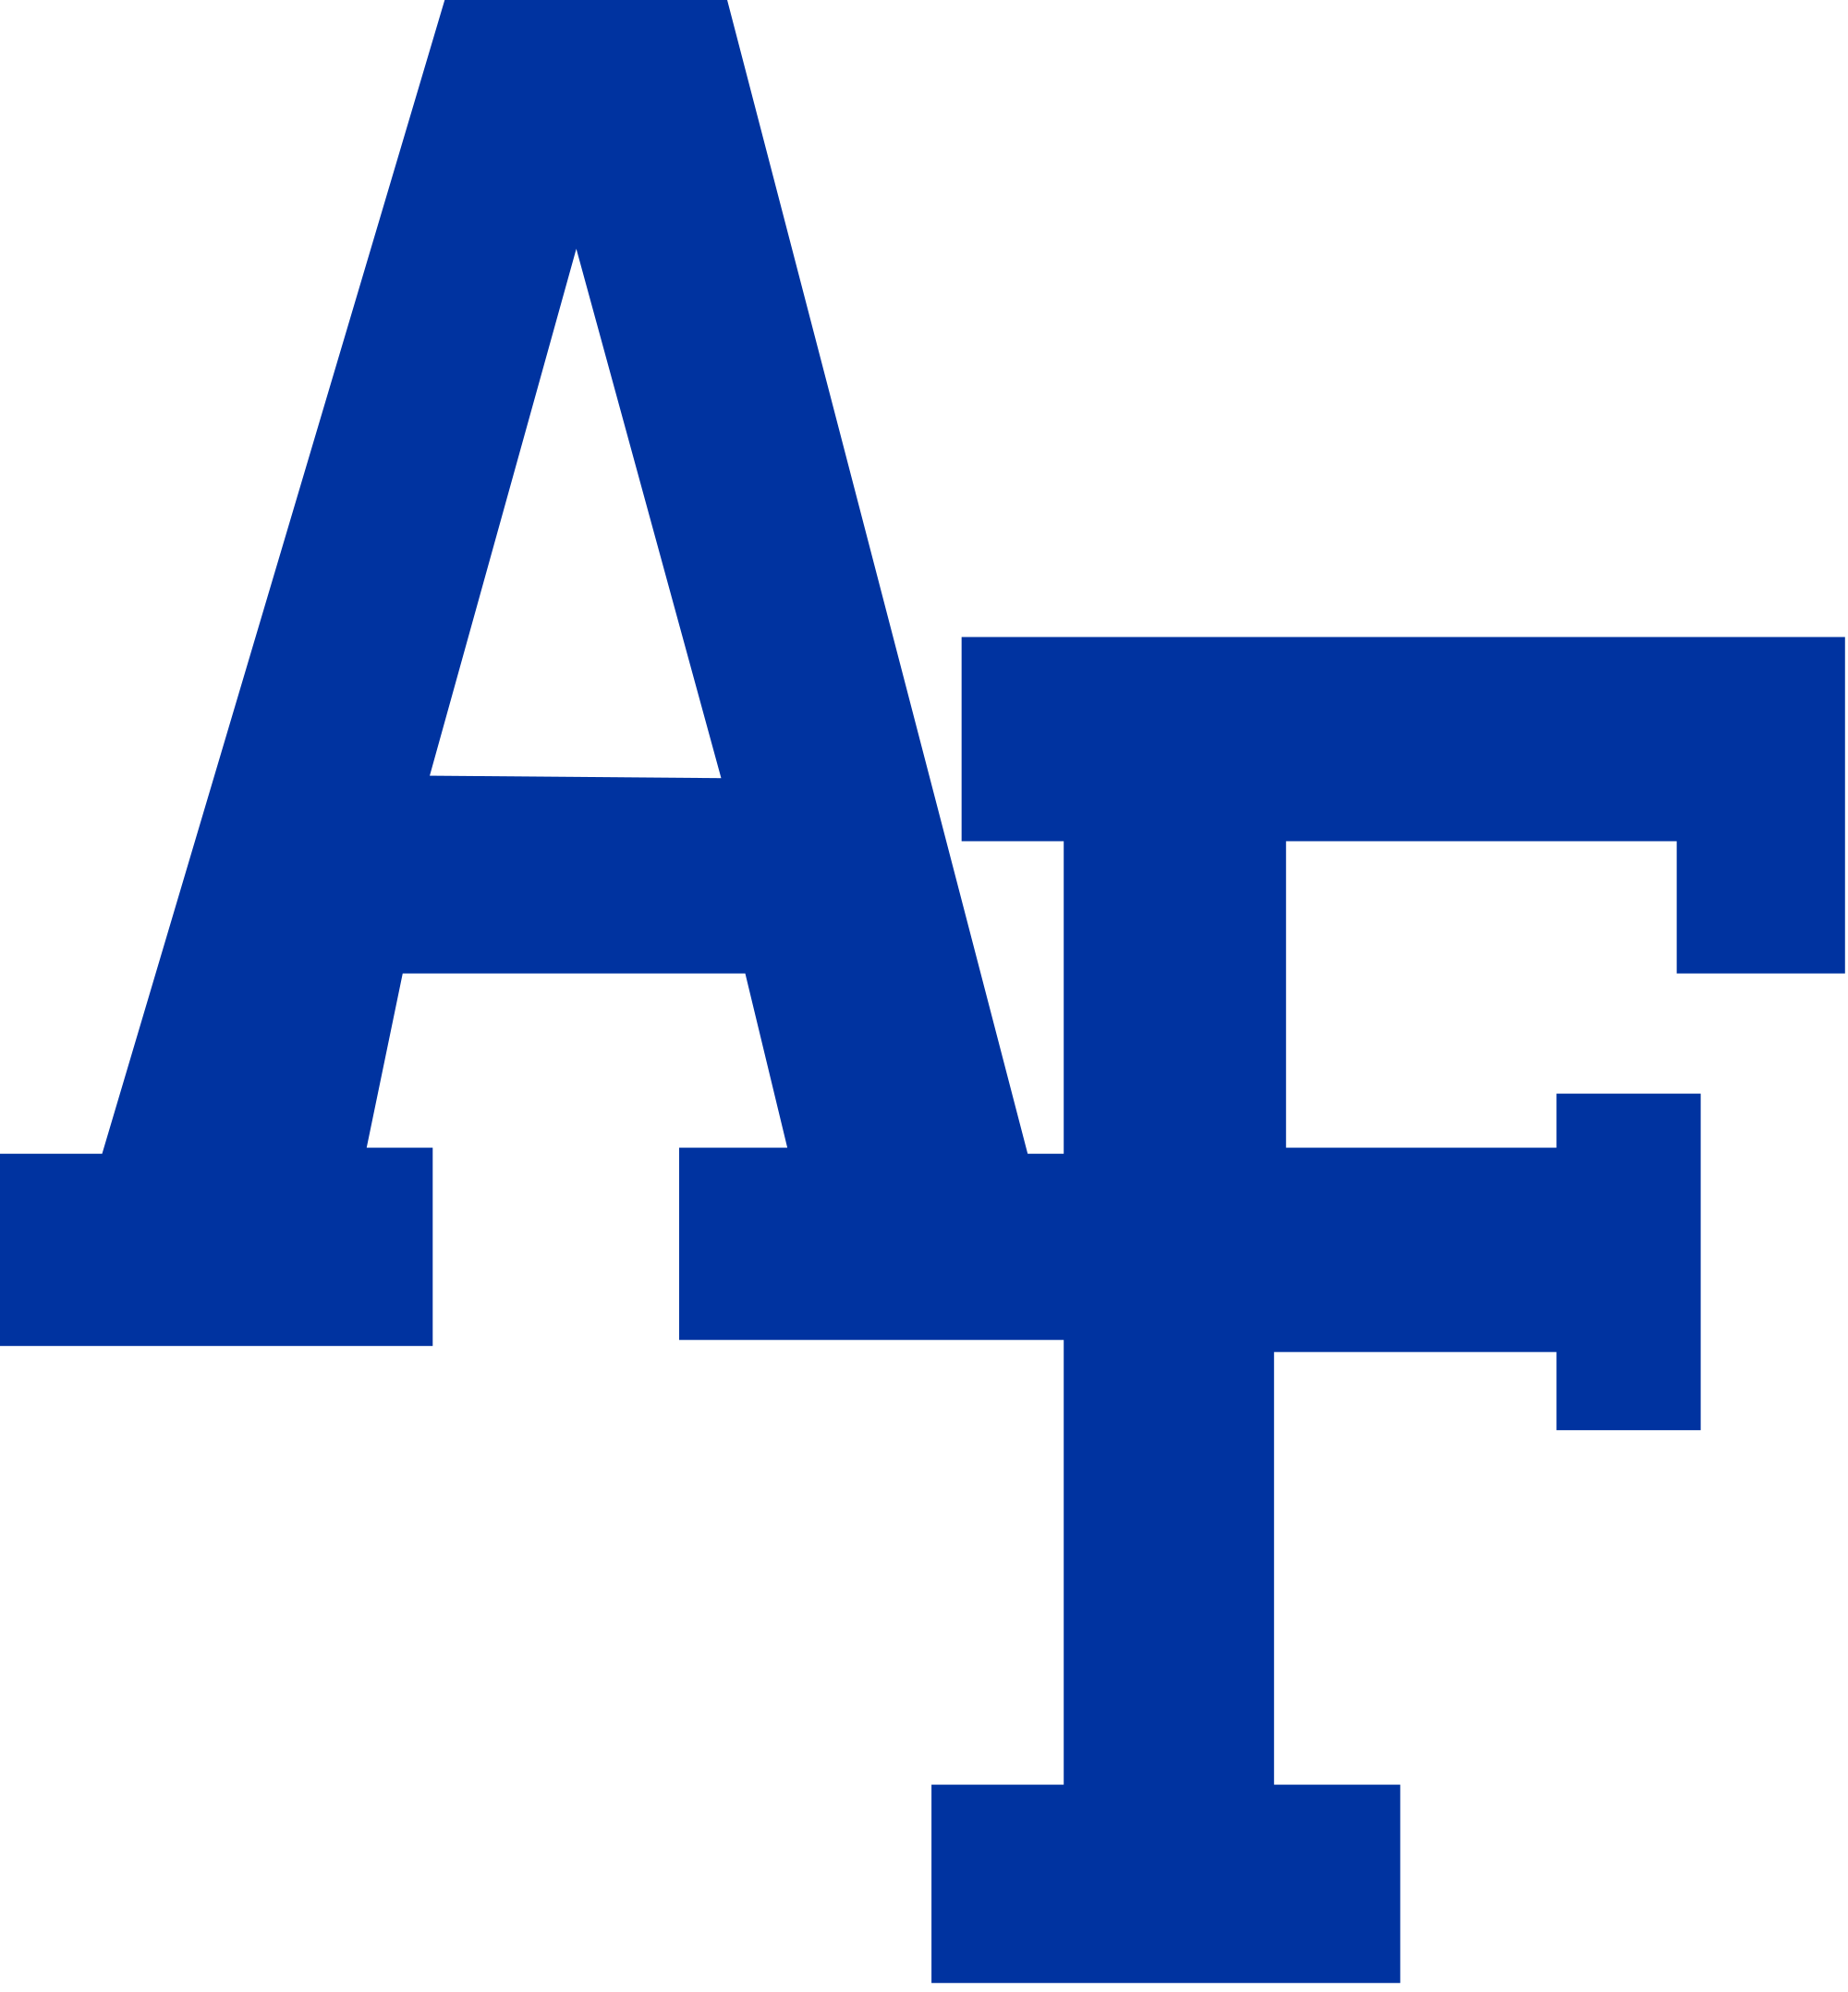 Air Force Logo - File:Air Force Falcons logo.svg - Wikimedia Commons